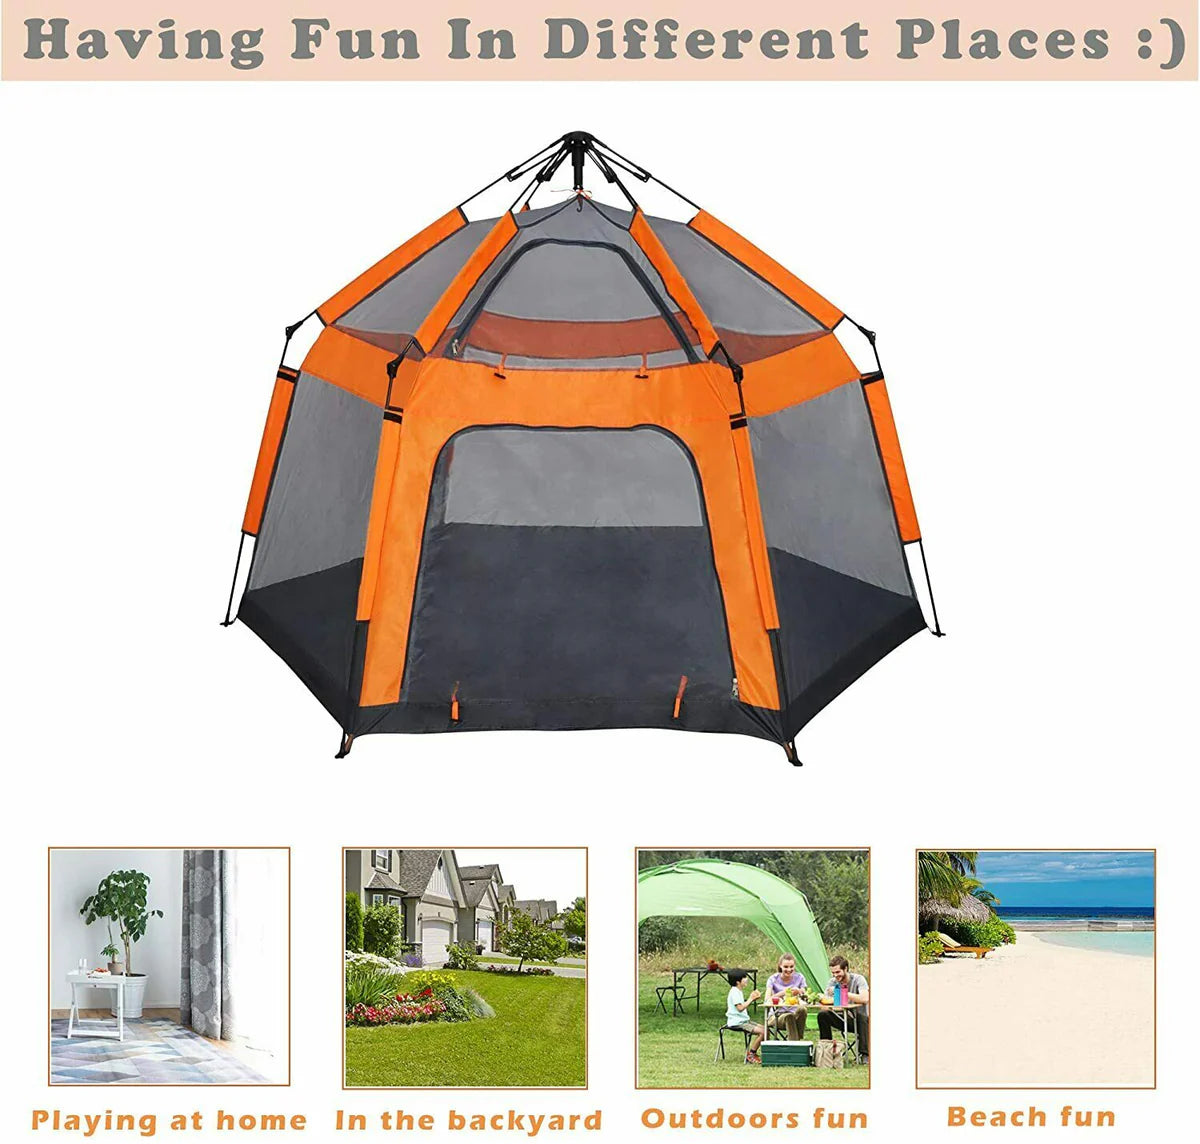 Pop Up Kids Play Tent Portable PlayHouse Camping beach Indoor Game Toys